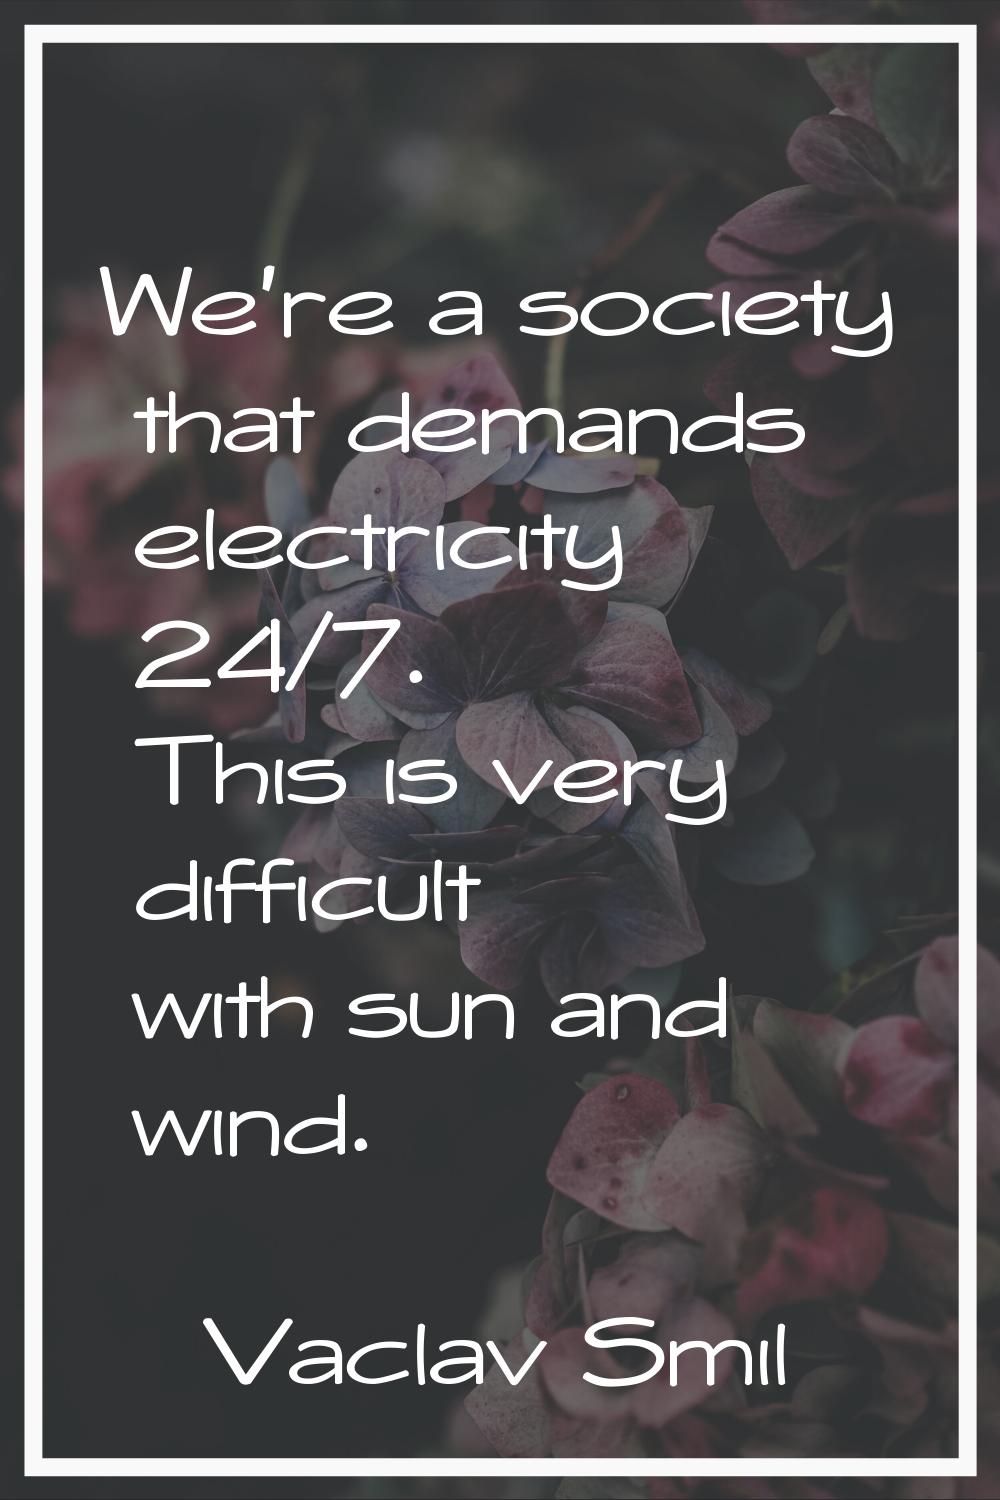 We're a society that demands electricity 24/7. This is very difficult with sun and wind.